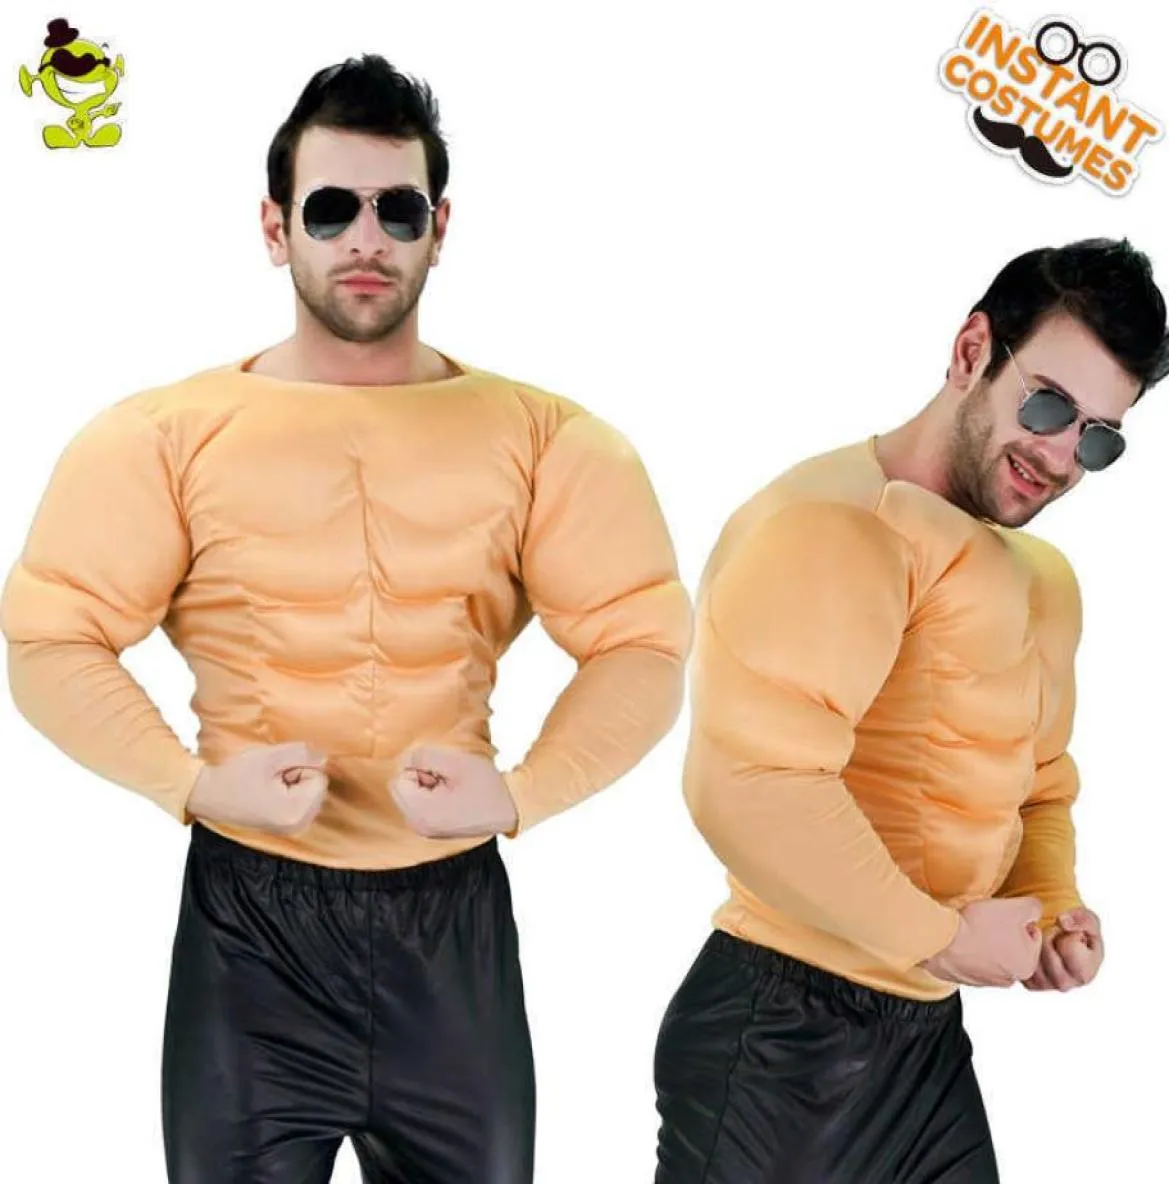 Nouvelle arrivée Muscle Top Men Muscle Top Costumes For Adult Cosplay Halloween drôle homme fort Rôle Play Party Costumes G09255963698